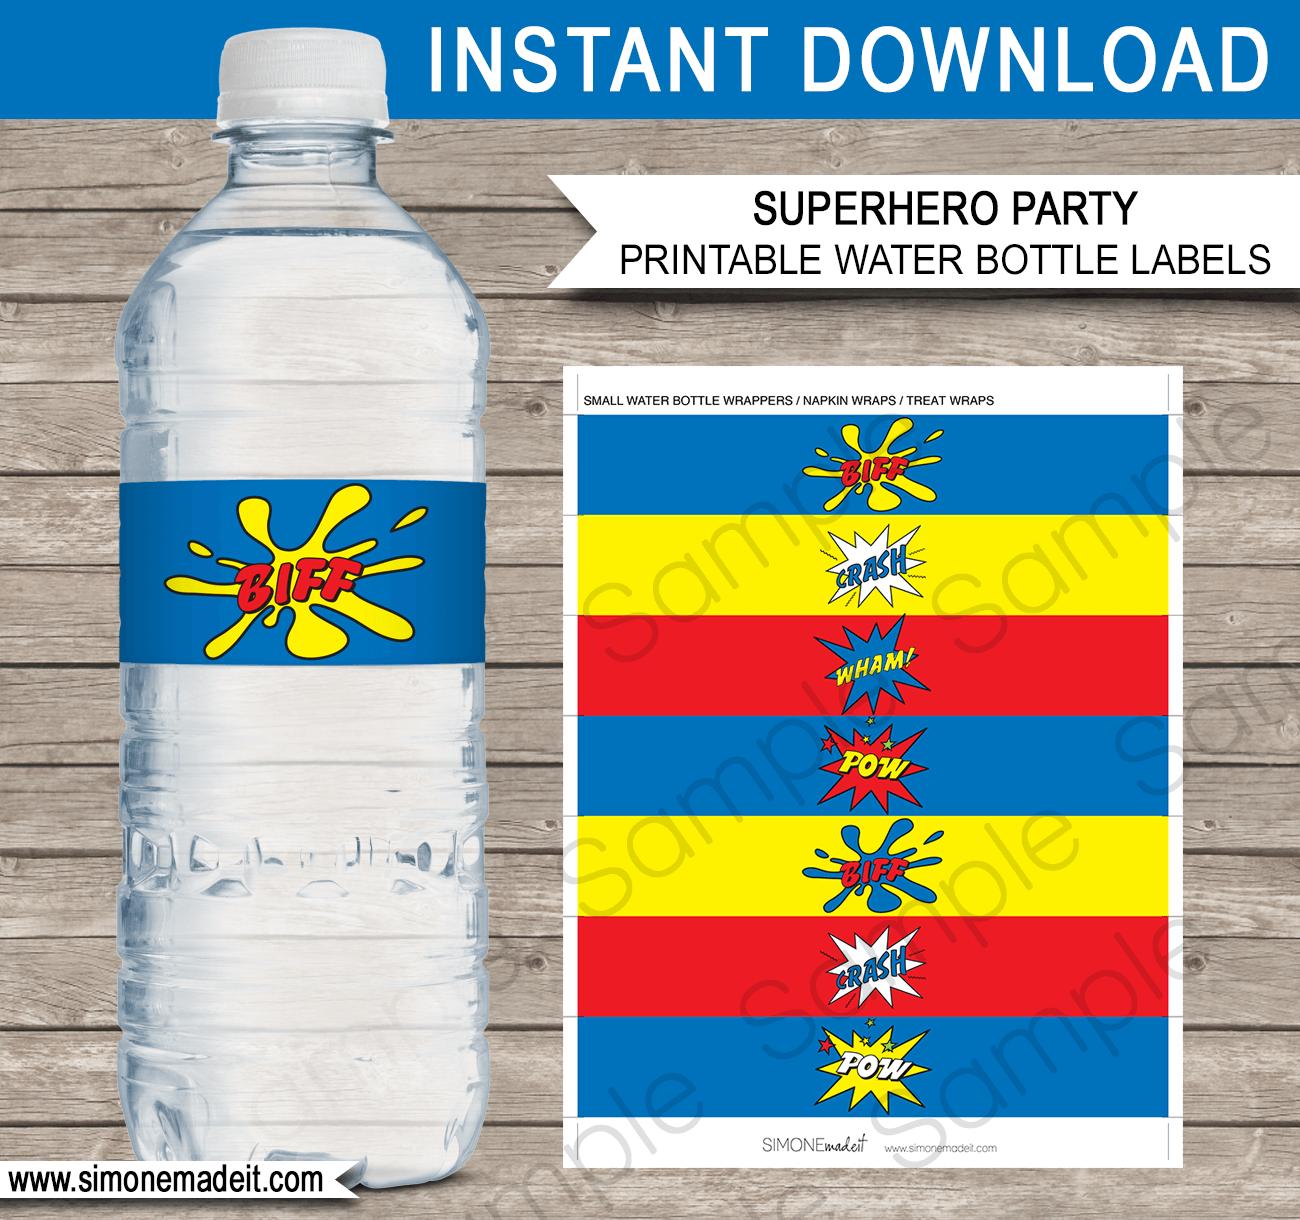 Printable Superhero Party Water Bottle Labels Template | Birthday Party Decorations | Editable Text | INSTANT DOWNLOAD via simonemadeit.com